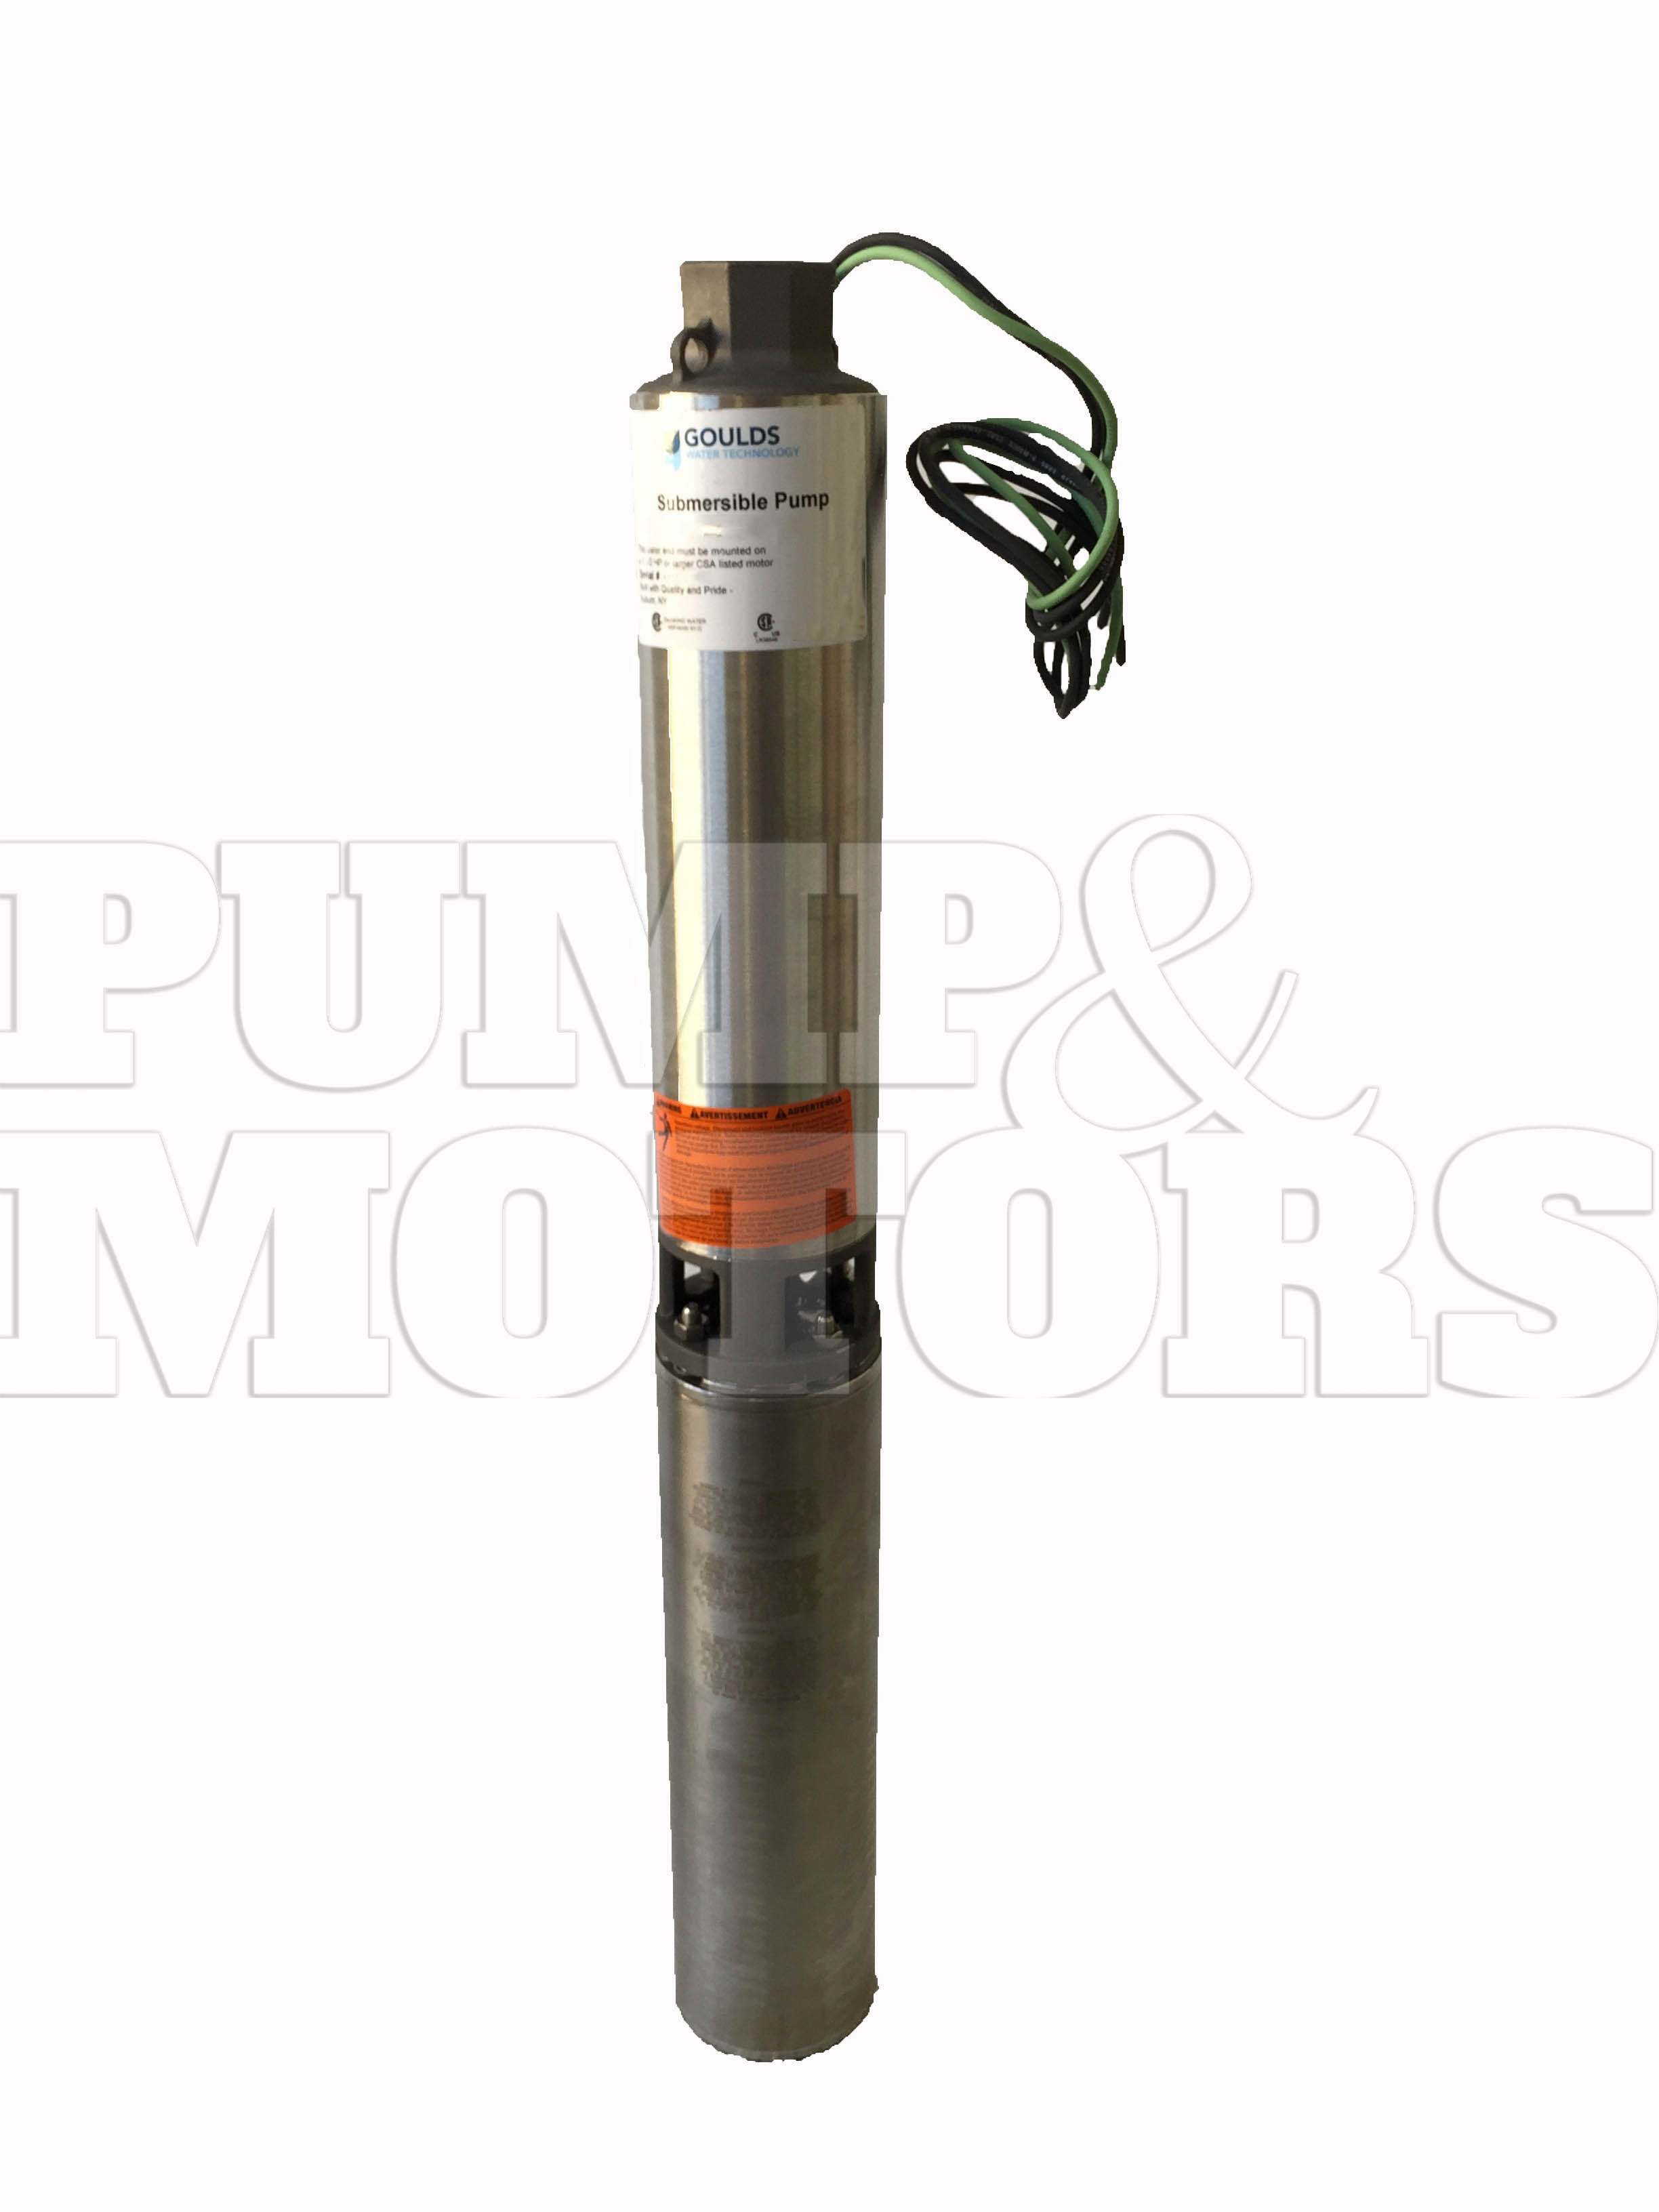 Goulds 25LS10422C 1HP 230V Submersible Water Well Pump 25GPM